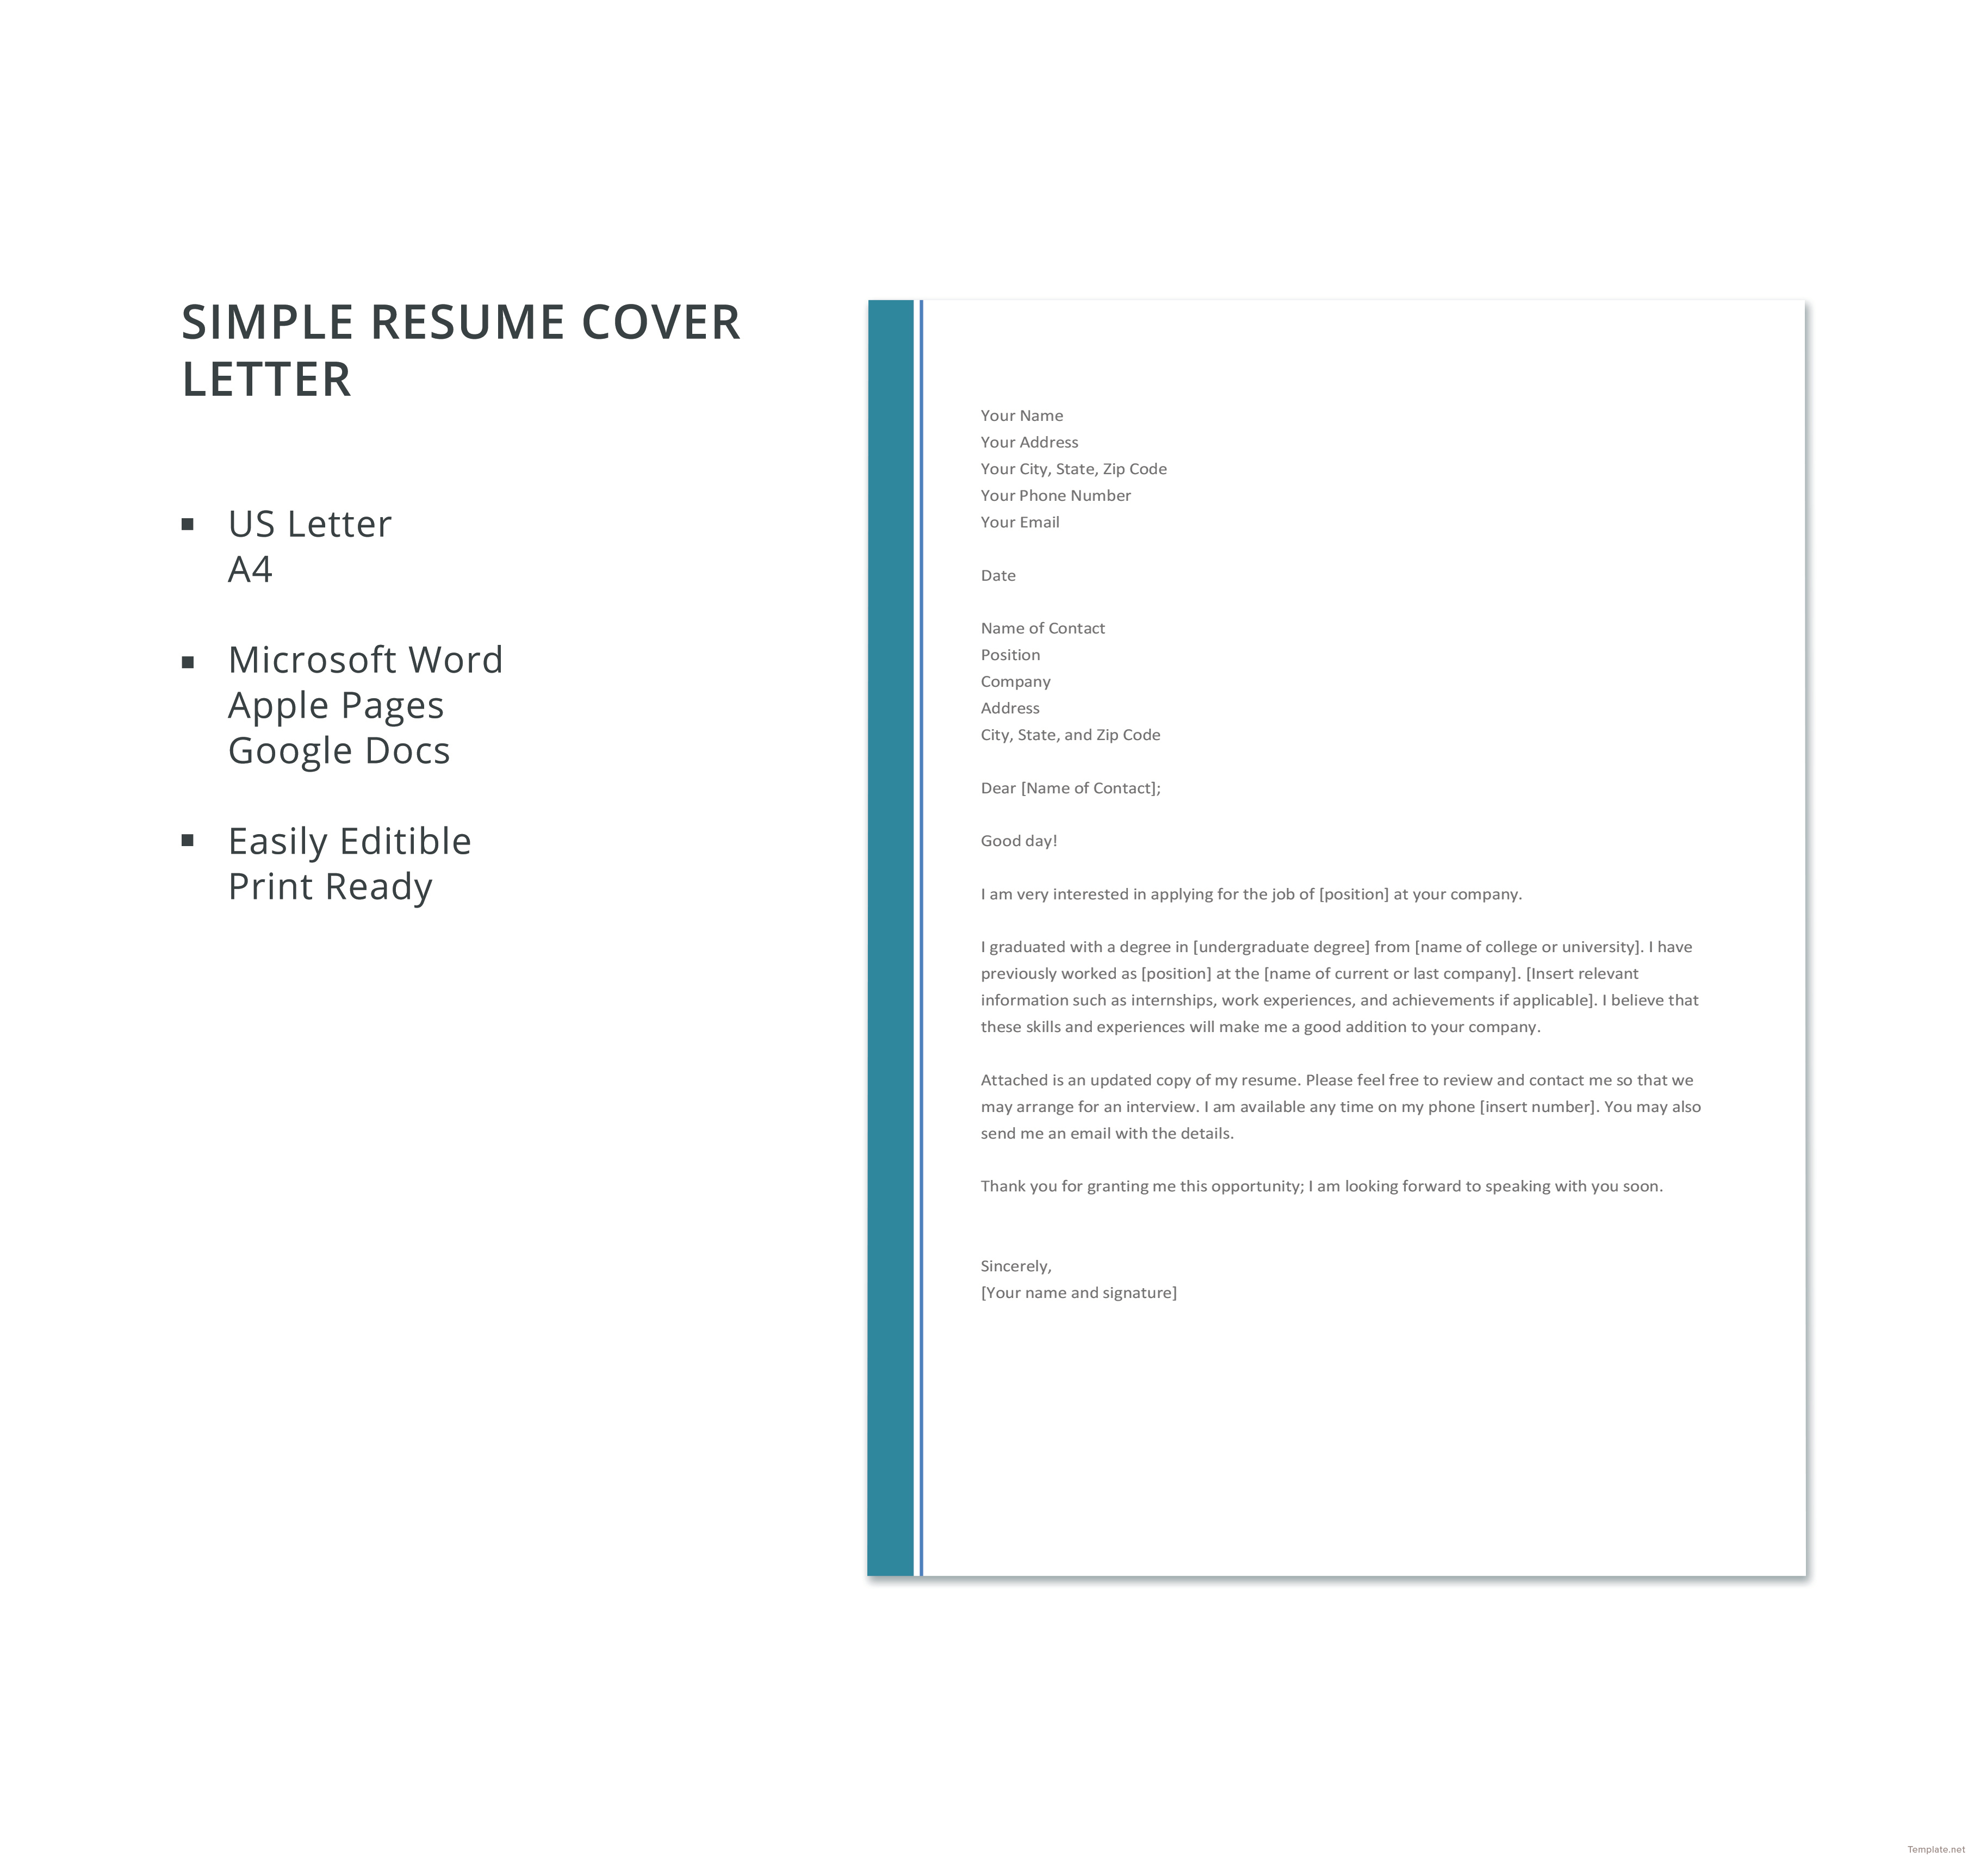 Free Simple Resume Cover Letter Template in Microsoft Word